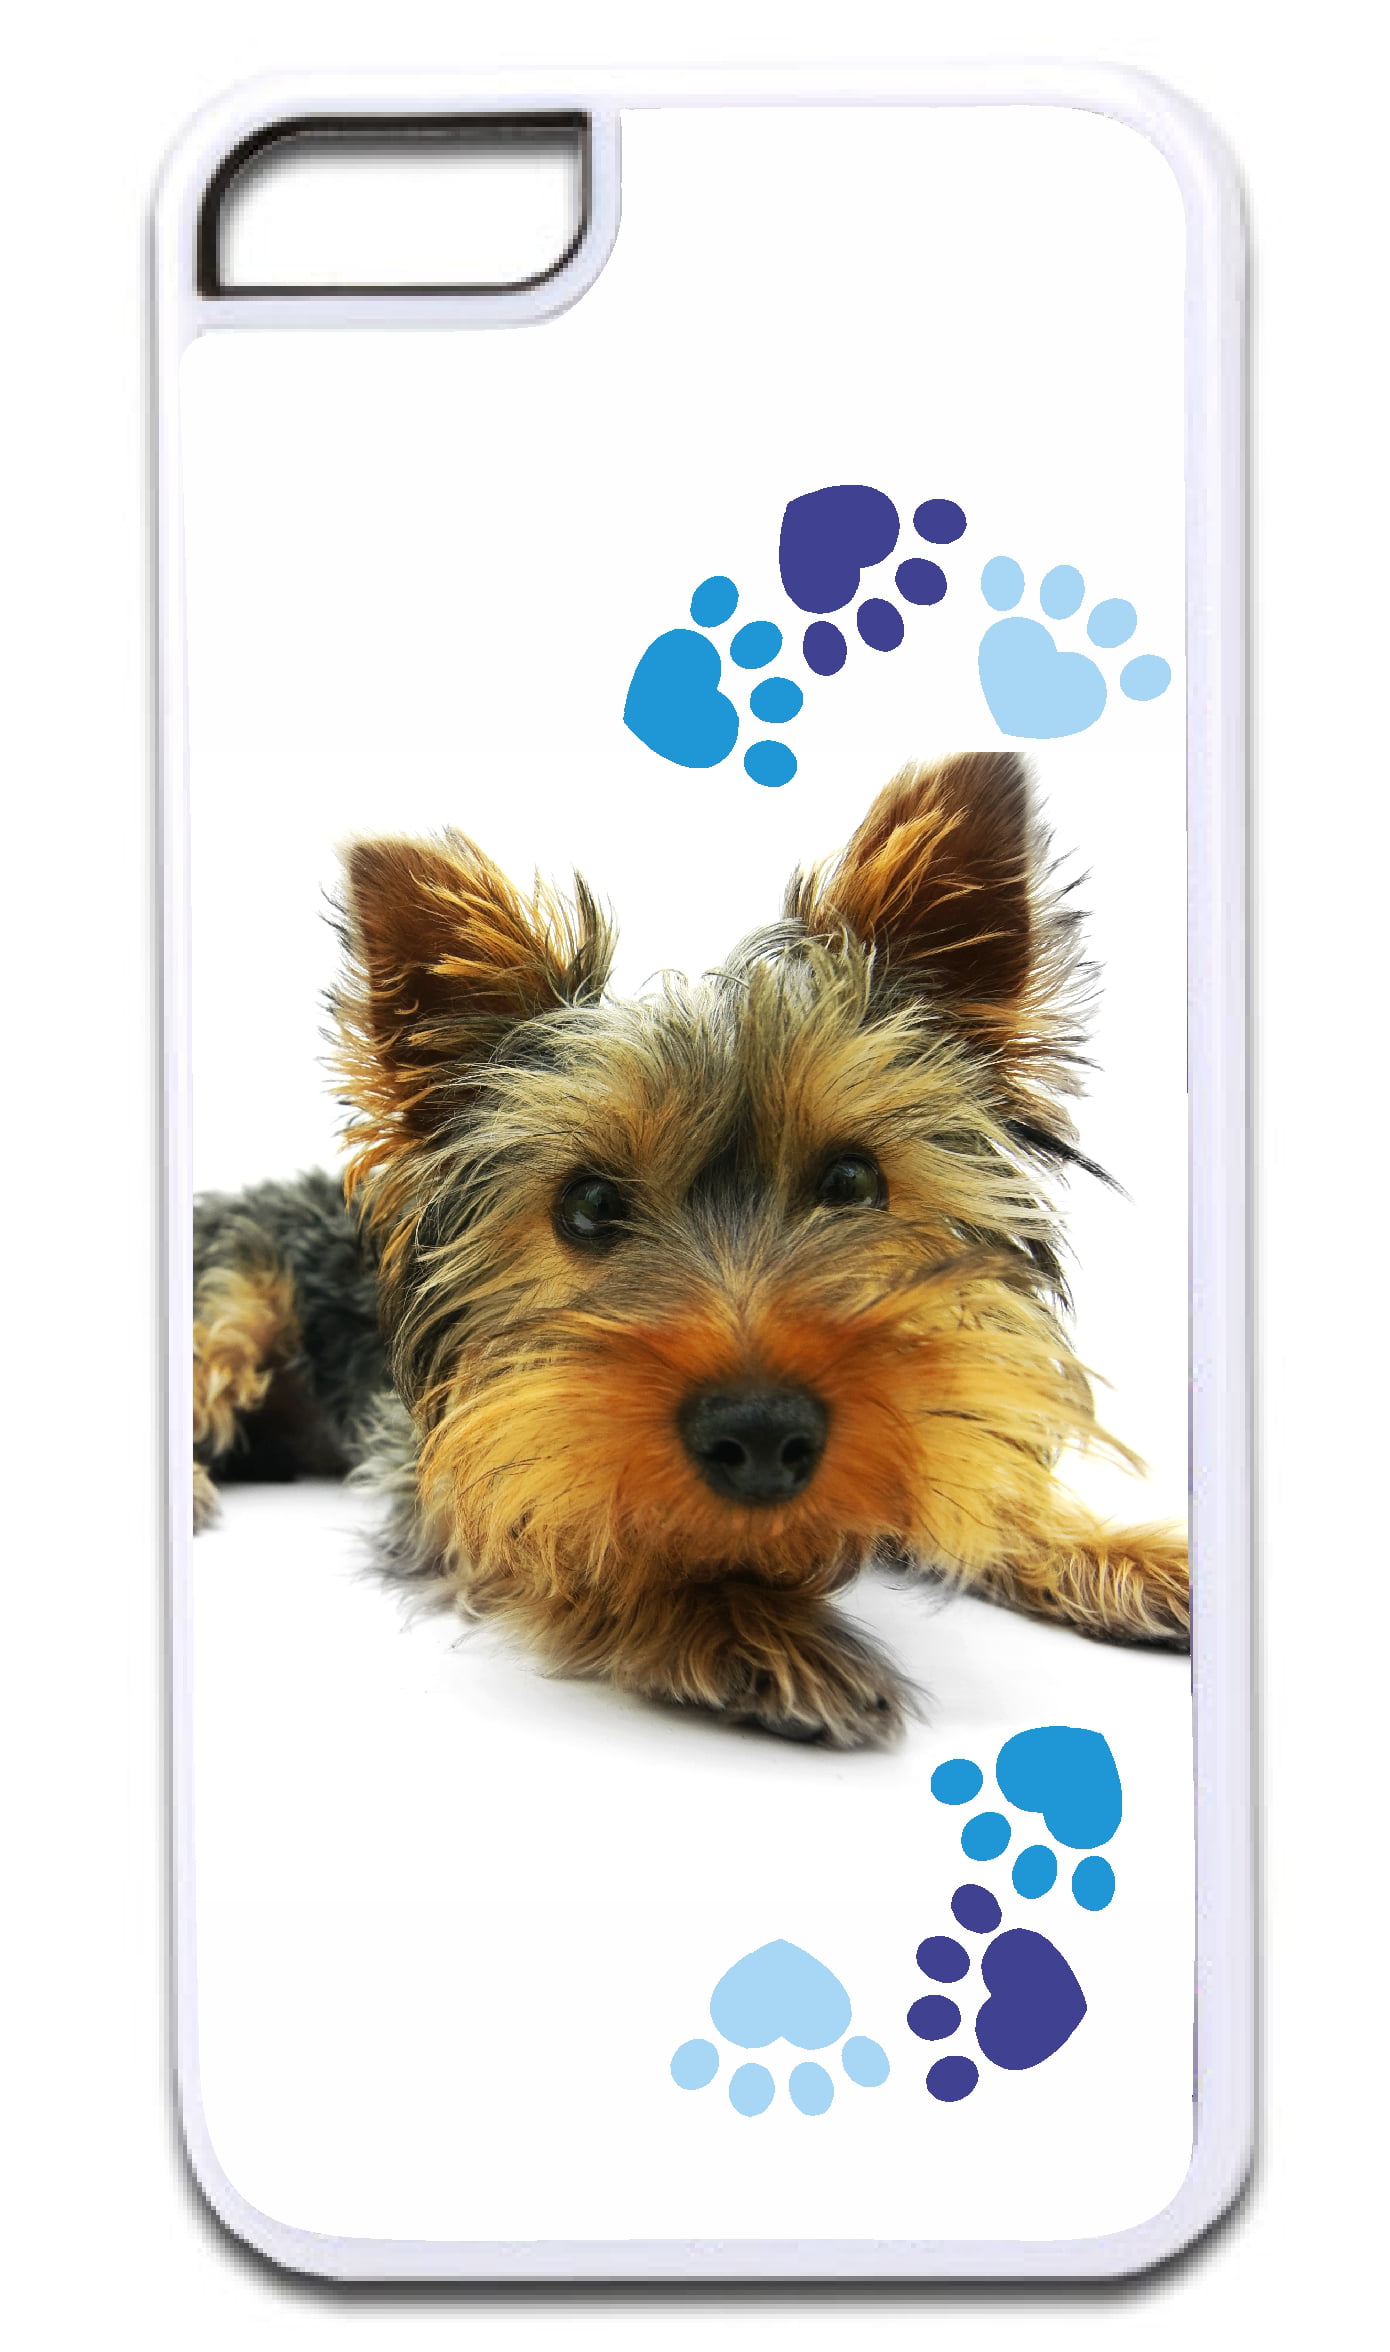 Yorkie Puppy Dog and Blue Pawprint Hearts Design White Rubber Case for the Apple iPhone 6 / iPhone 6s - iPhone 6 Accessories - iPhone 6s Accessories